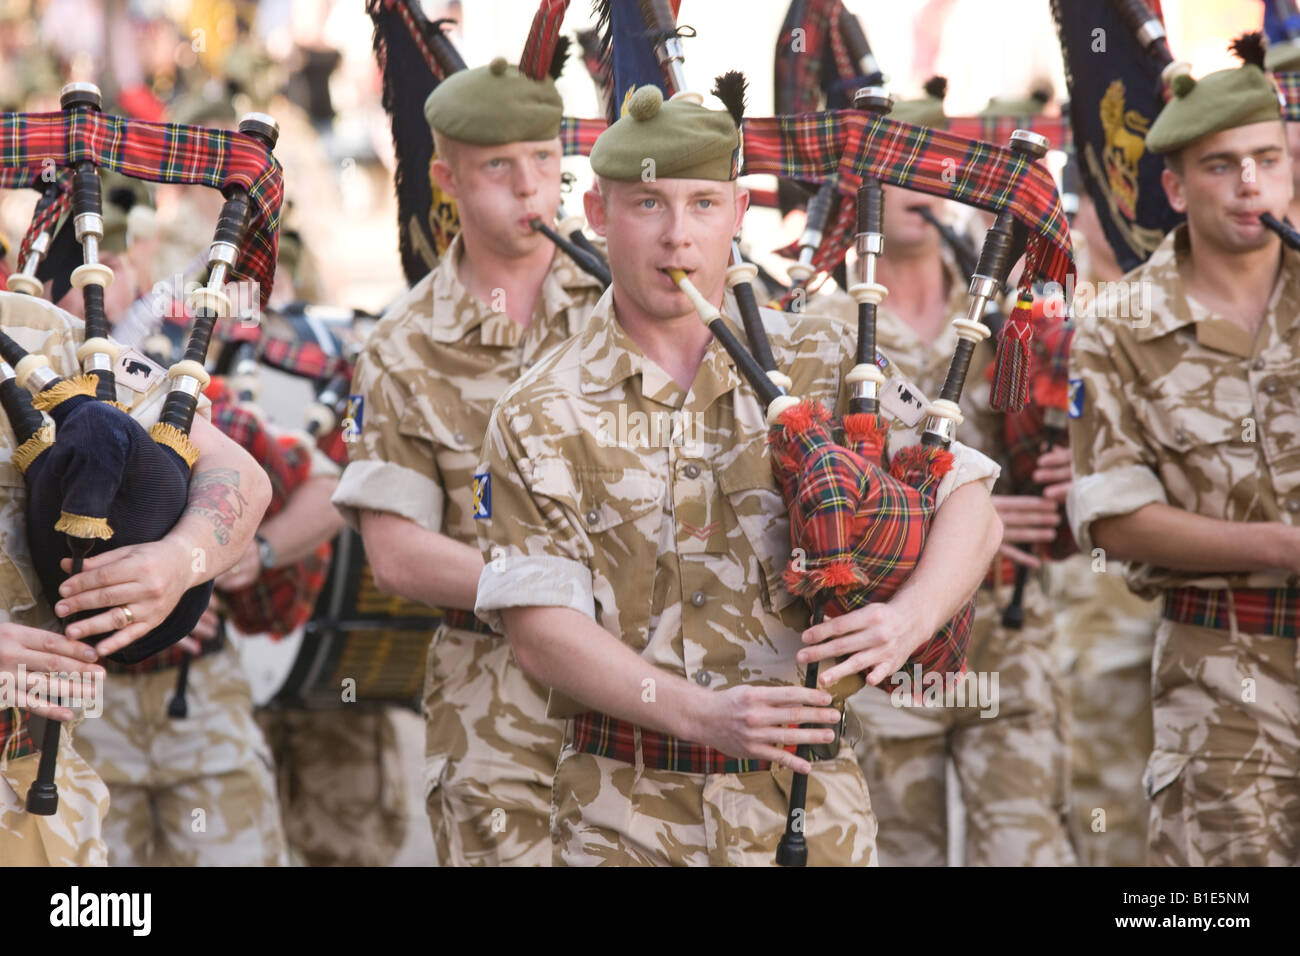 The Royal Regiment of Scotland marching through Dumfries town centre Scottish military army band bagpipers play pipes UK Stock Photo